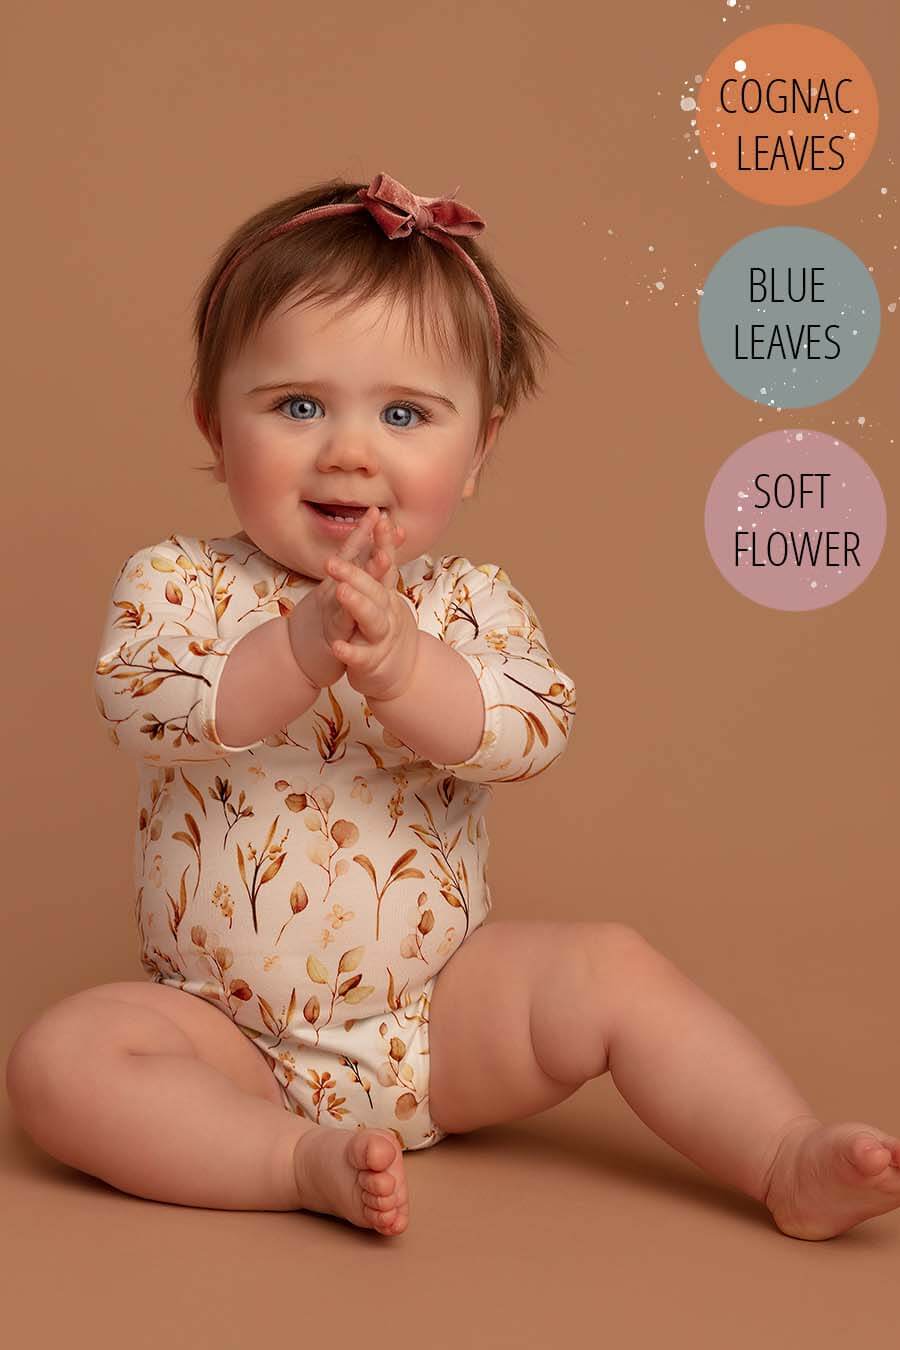 baby girl poses sitting and wearing a baby romper with long sleeves with leaves pattern in sepia tones.